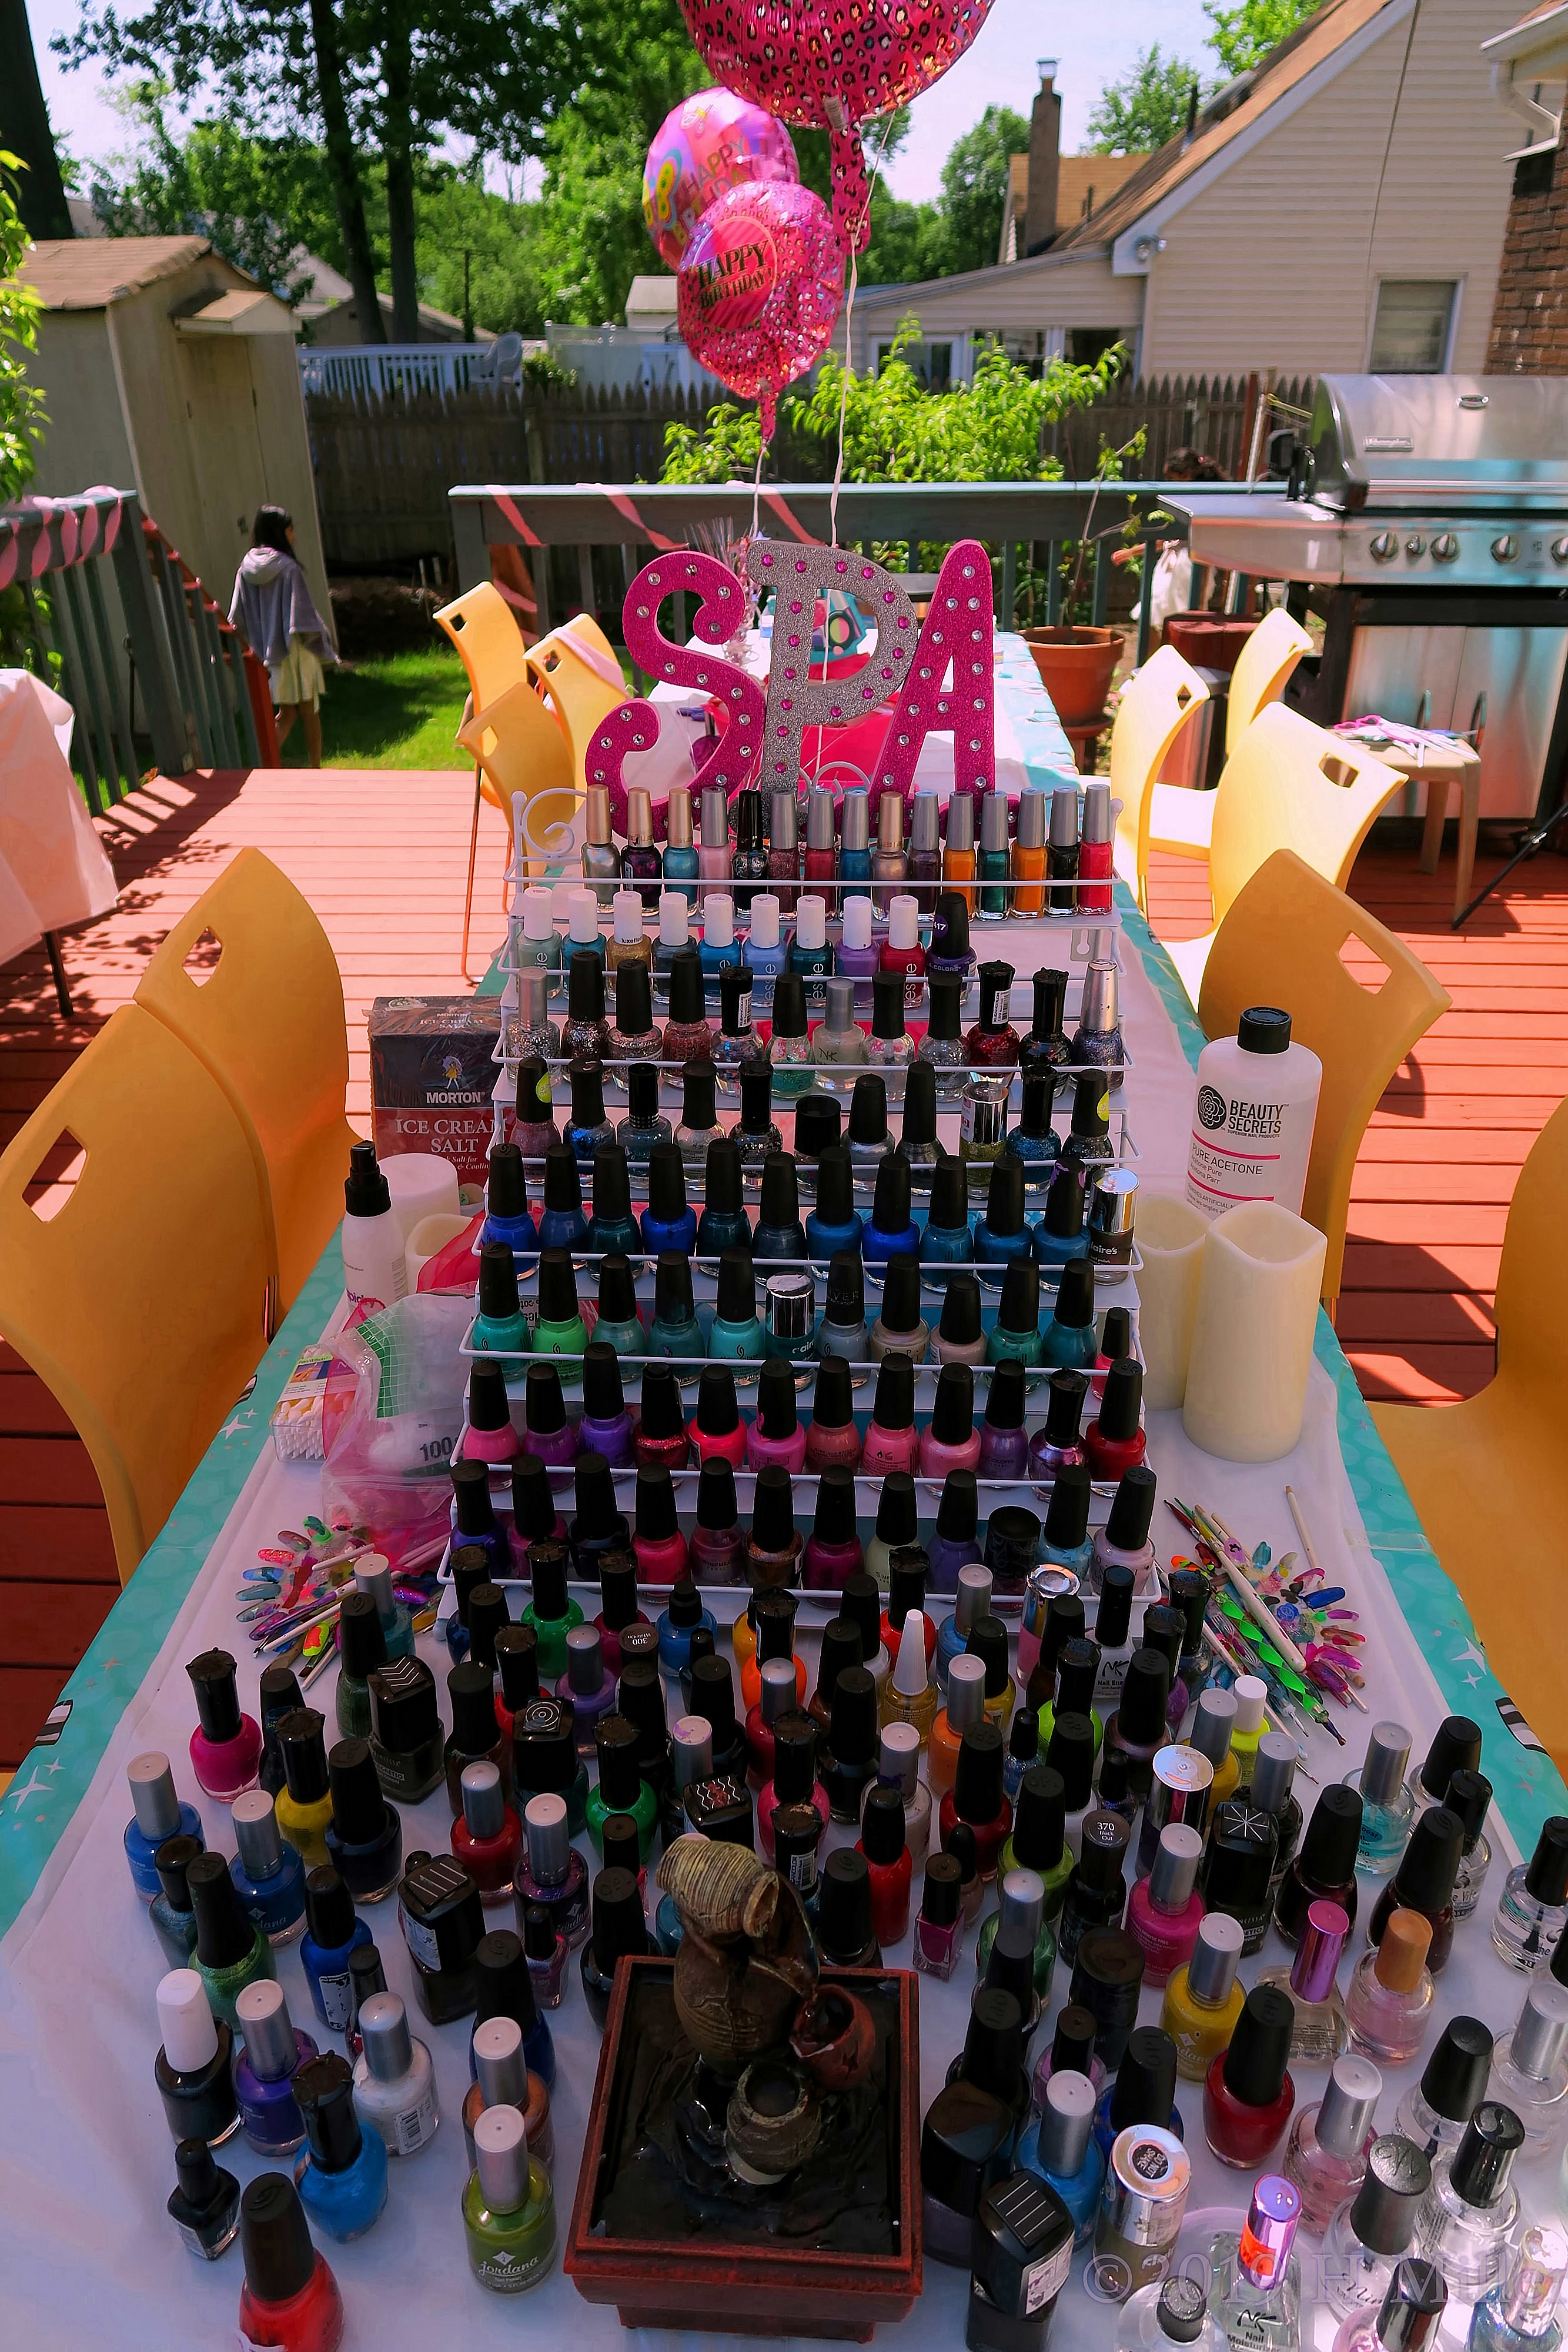 Nail Art Design Station Complete With An Aray Of Nail Polishes